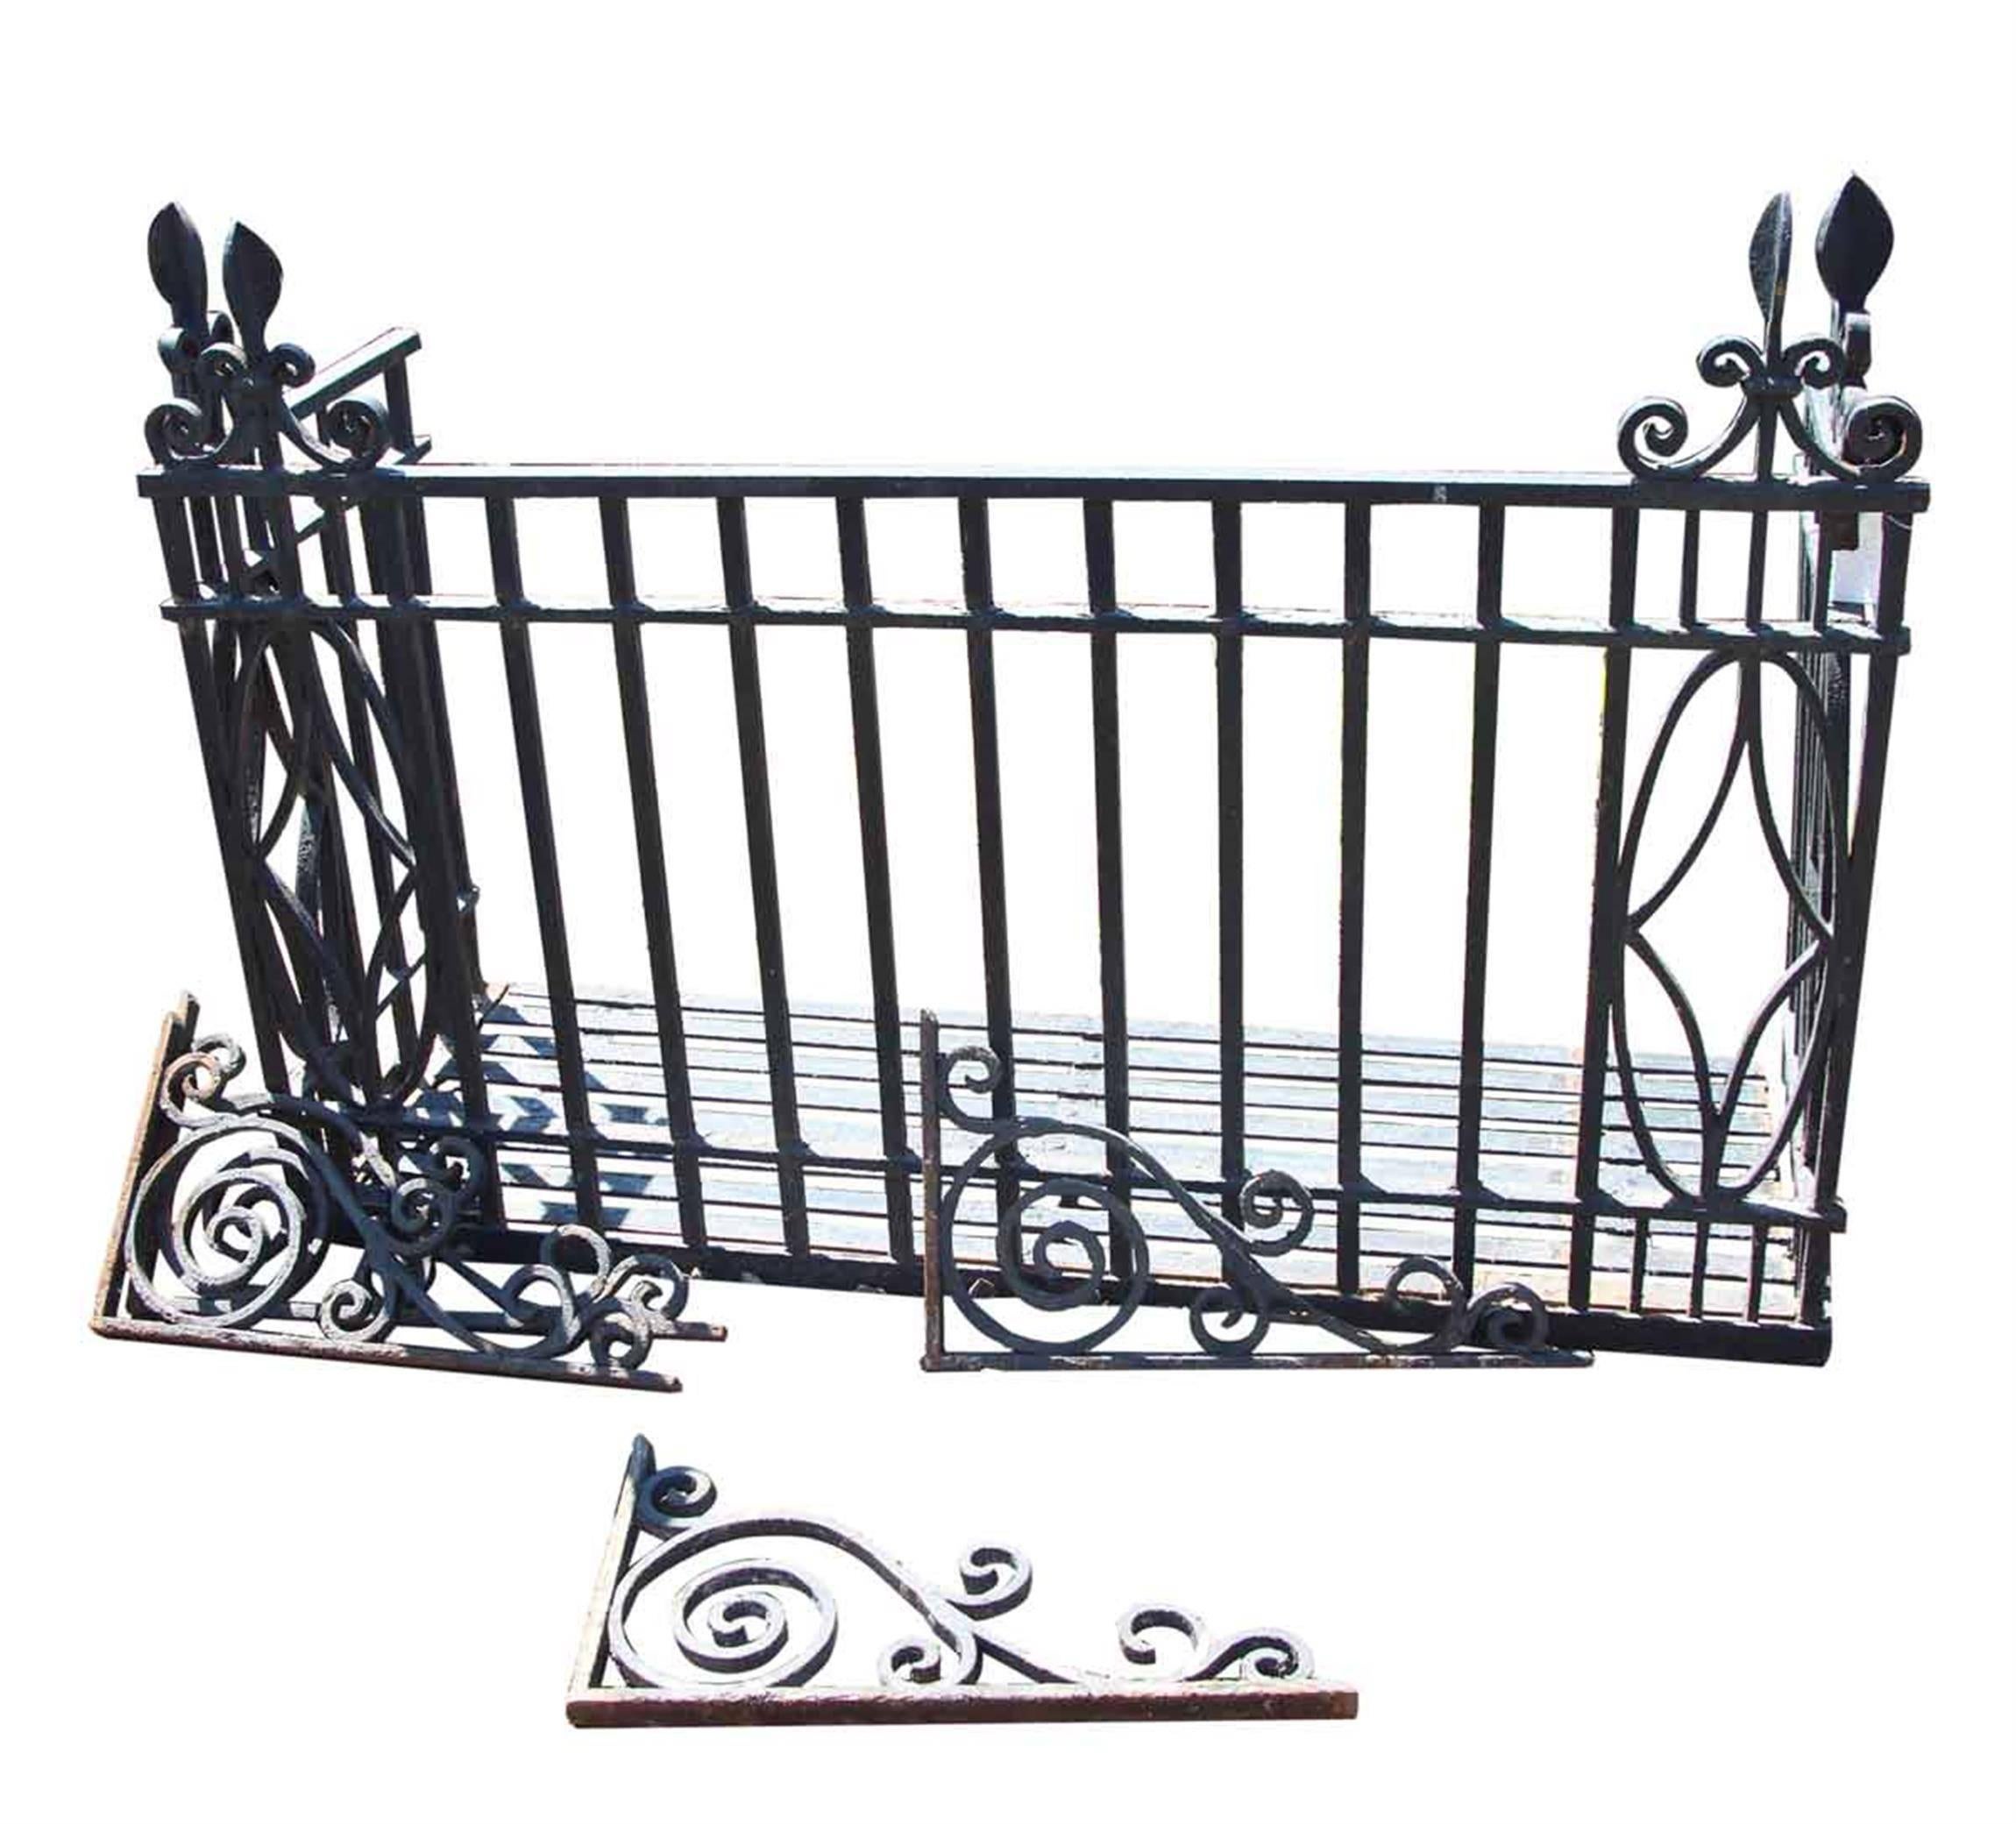 Original turn of the century 1905 wrought iron Georgian balcony, complete with the original wrought iron brackets and finials. The finials and brackets are all hand pounded and handsmithed. The original riveted iron strap floor is included. This can